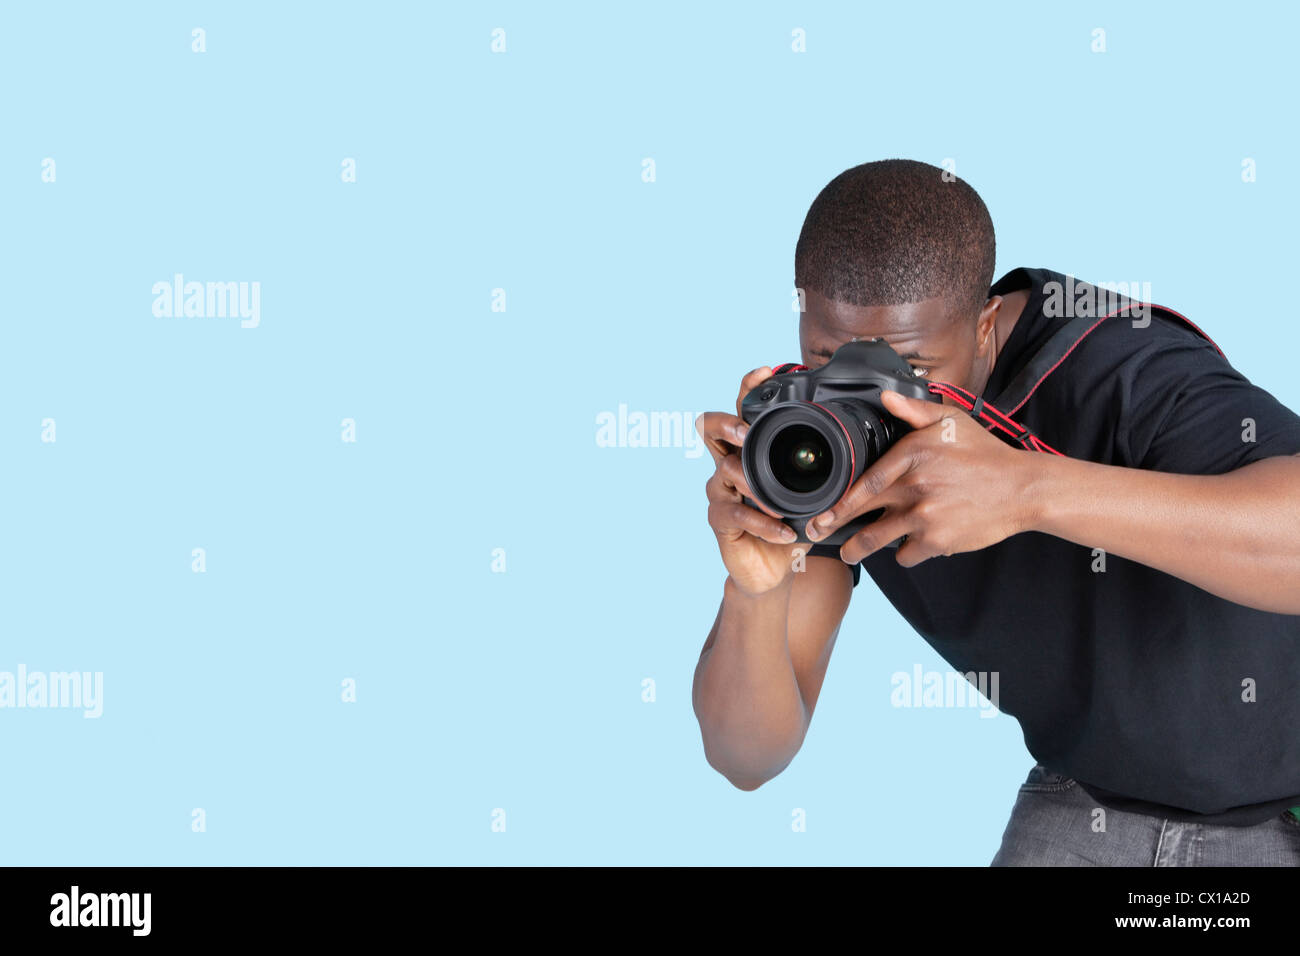 Young man taking photo through digital camera over blue background Stock Photo